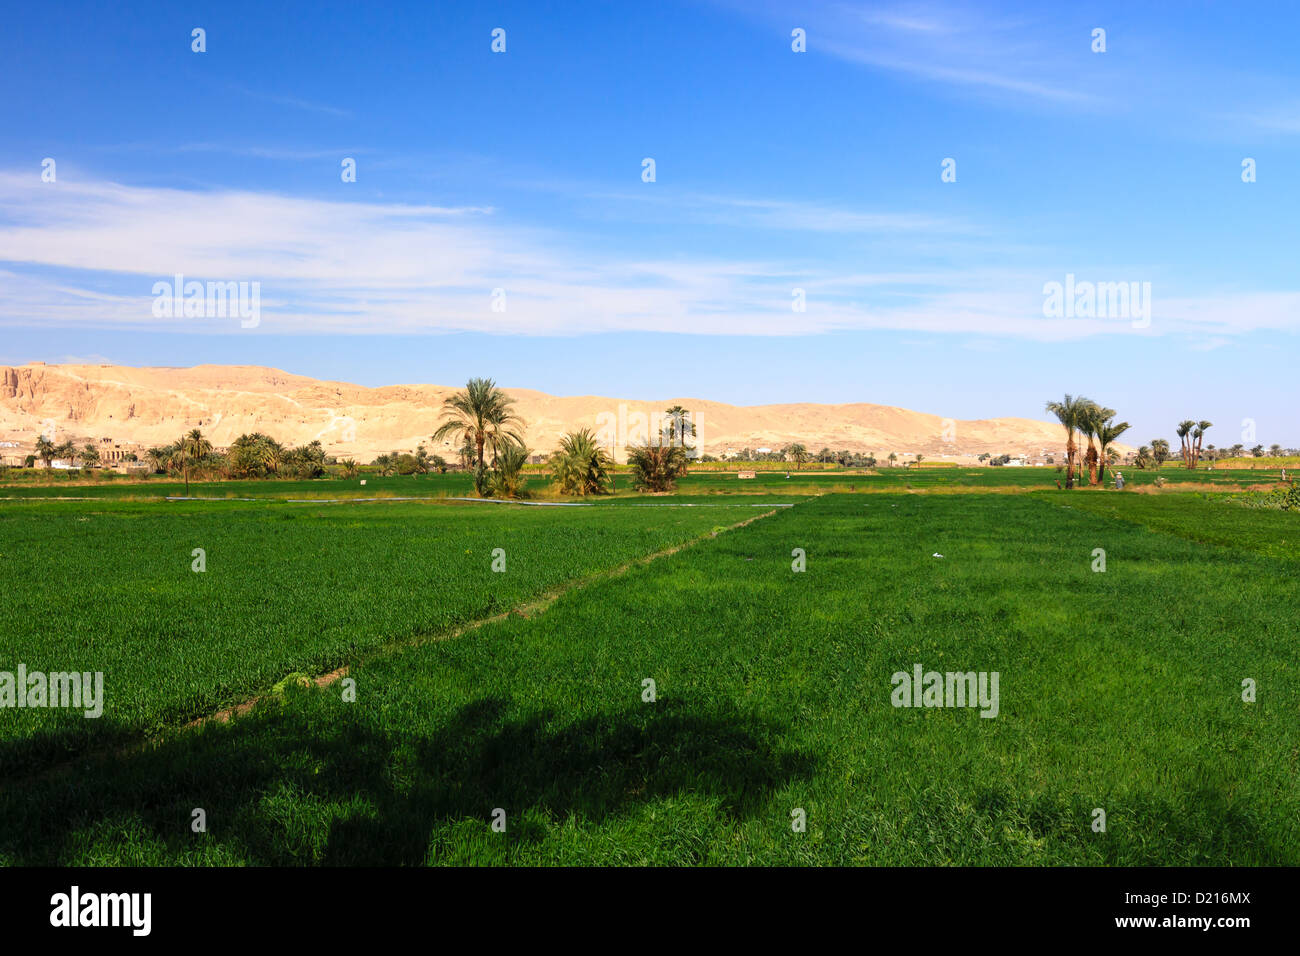 Bright green fields contrast with the nearby dry yellow desert mountains in Luxor, Egypt Stock Photo